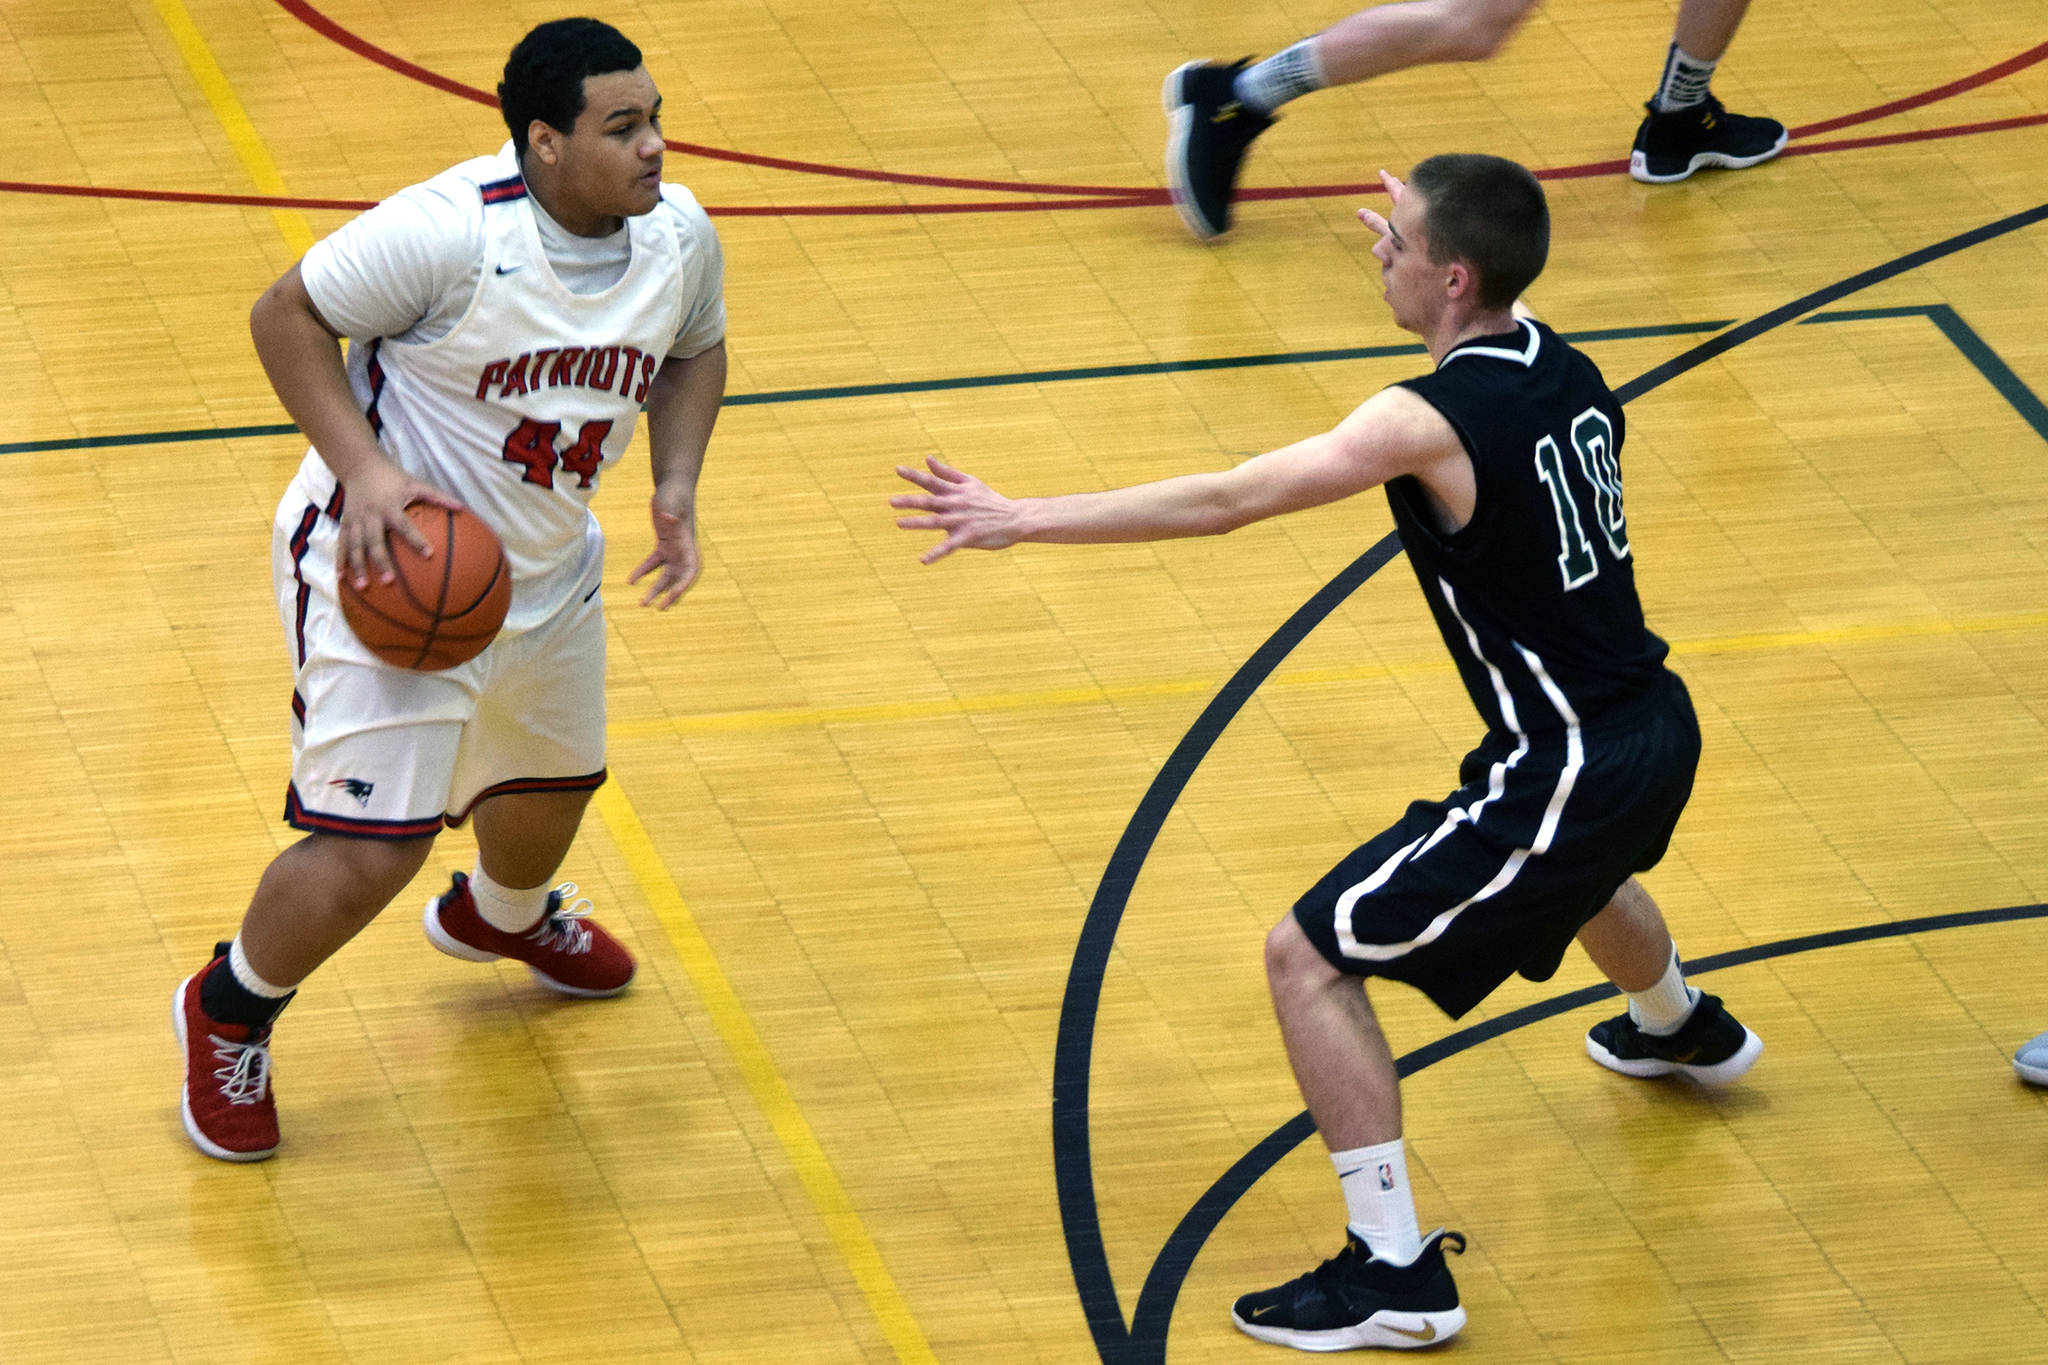 North Pole’s Alijah Agee is defended by Haines’ Carson Crager in their game at the Princess Cruises Capital City Classic at JDHS on Monday, Dec. 30, 2019. (Nolin Ainsworth | Juneau Empire)